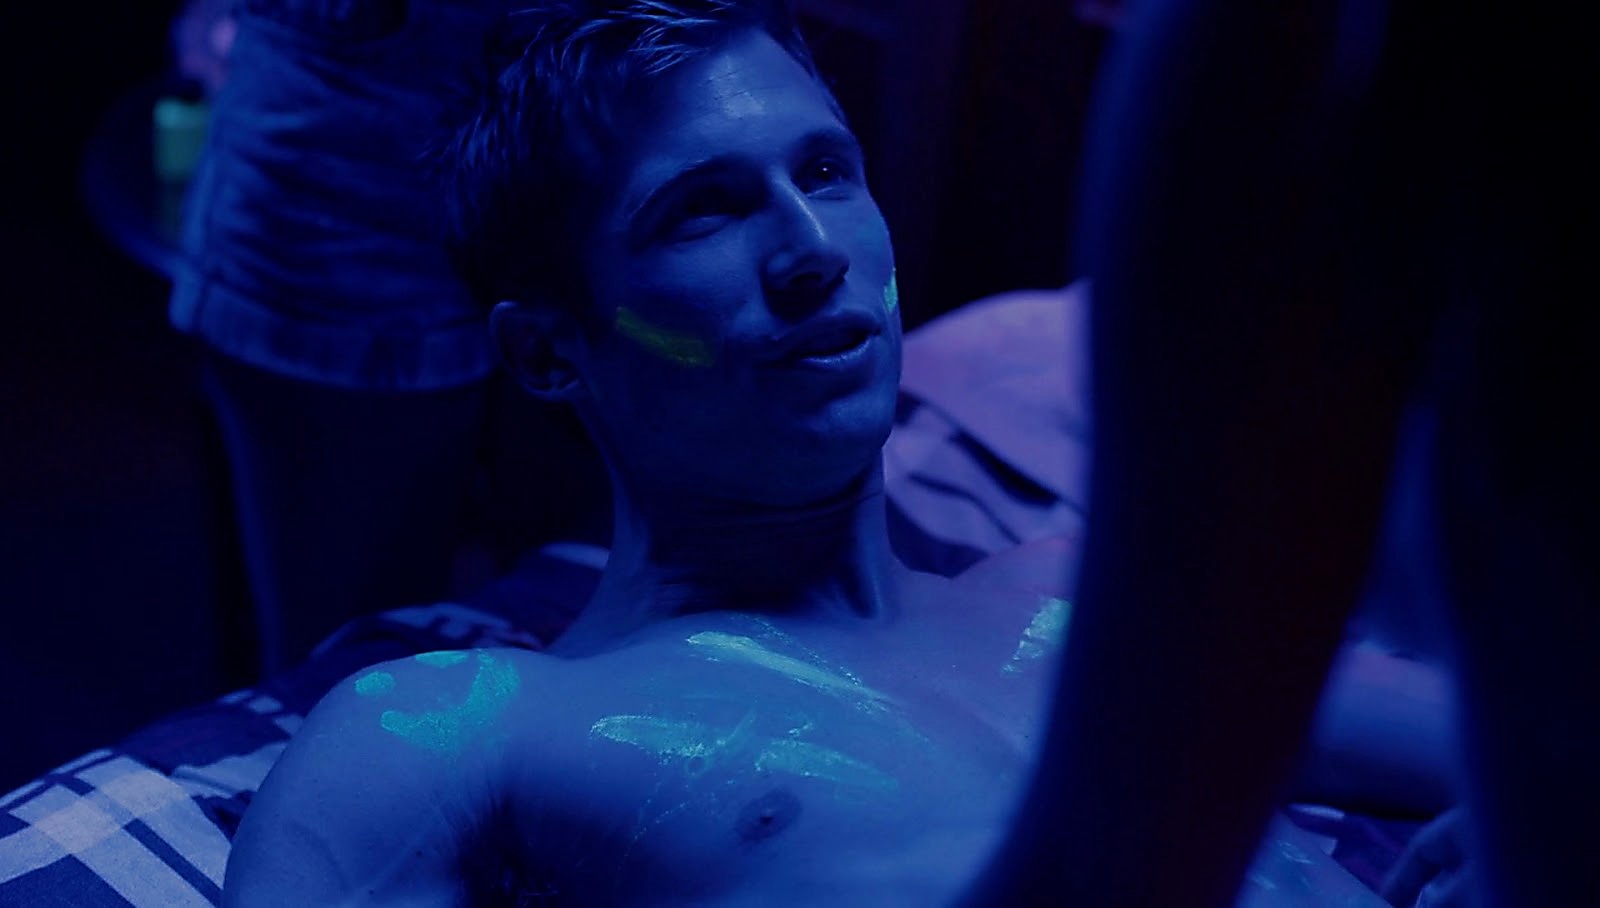 Justin Deeley sexy shirtless scene May 11, 2017, 11am